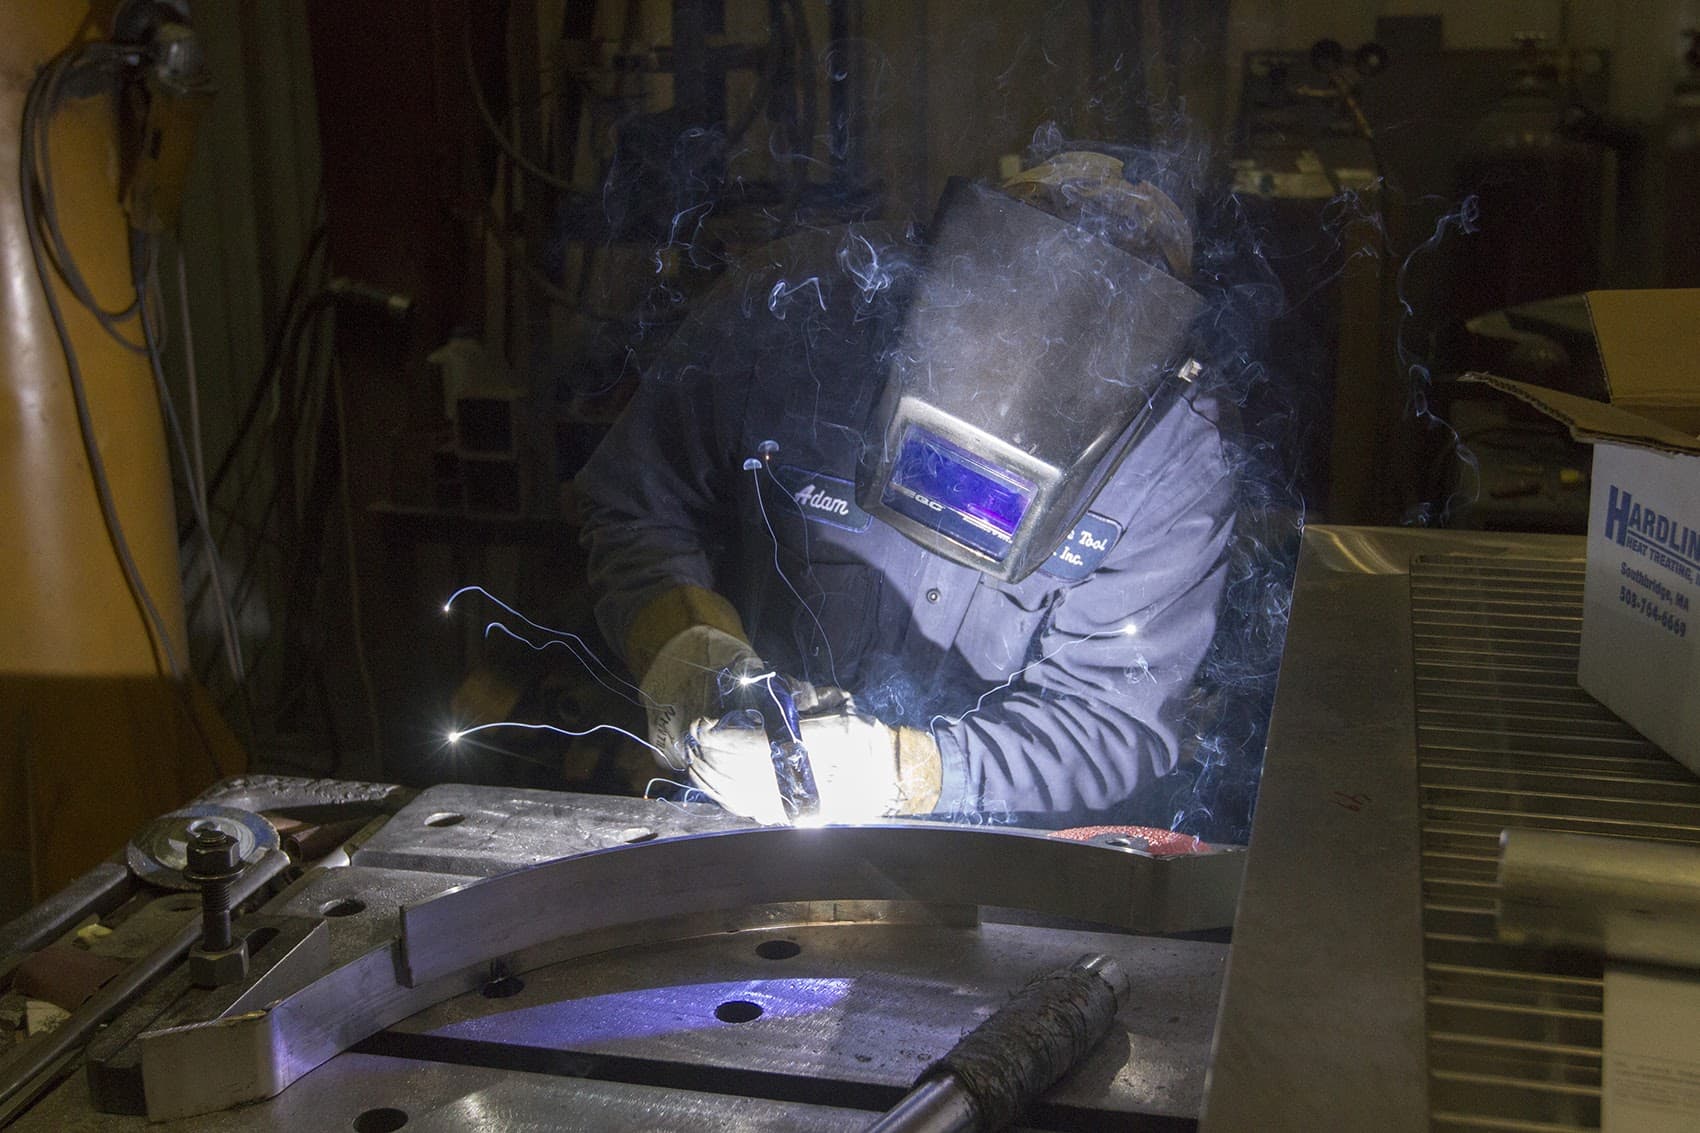 Adam Rathburn, welding a chair at Southbridge Tool and Manufacturing in Dudley where Team Hoyt Running Chairs are made. (Joe Difazio for WBUR)